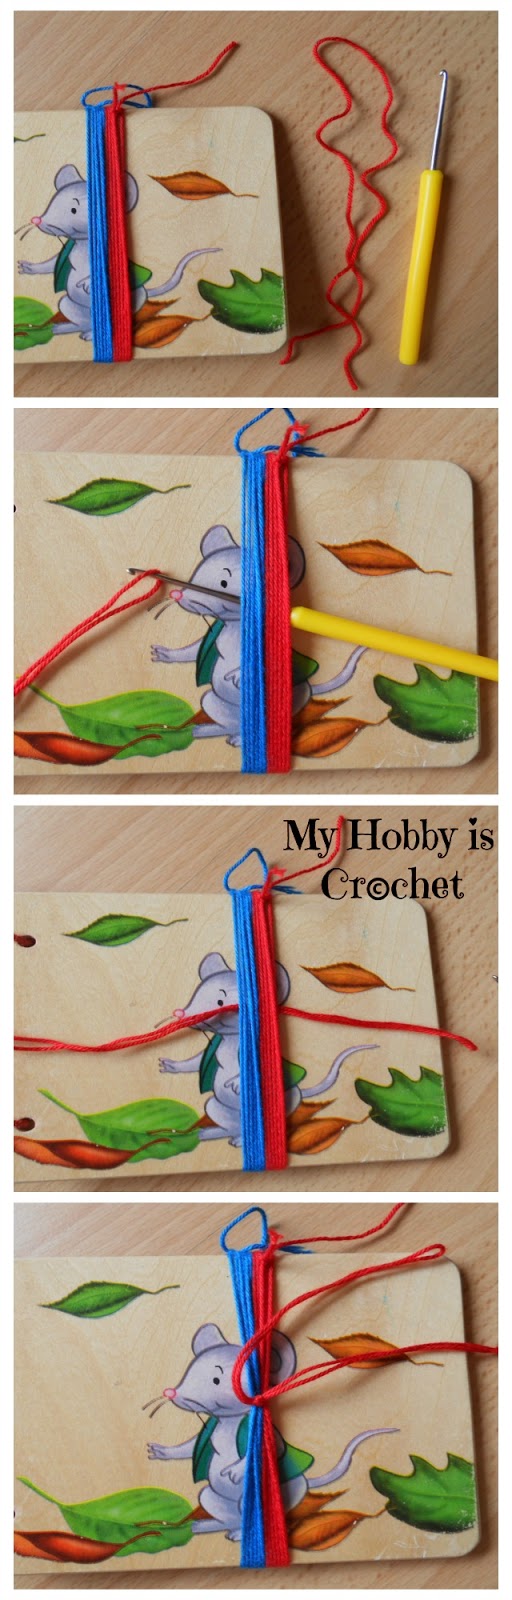 My Hobby Is Crochet: How to make a tassel - A step by step tutorial